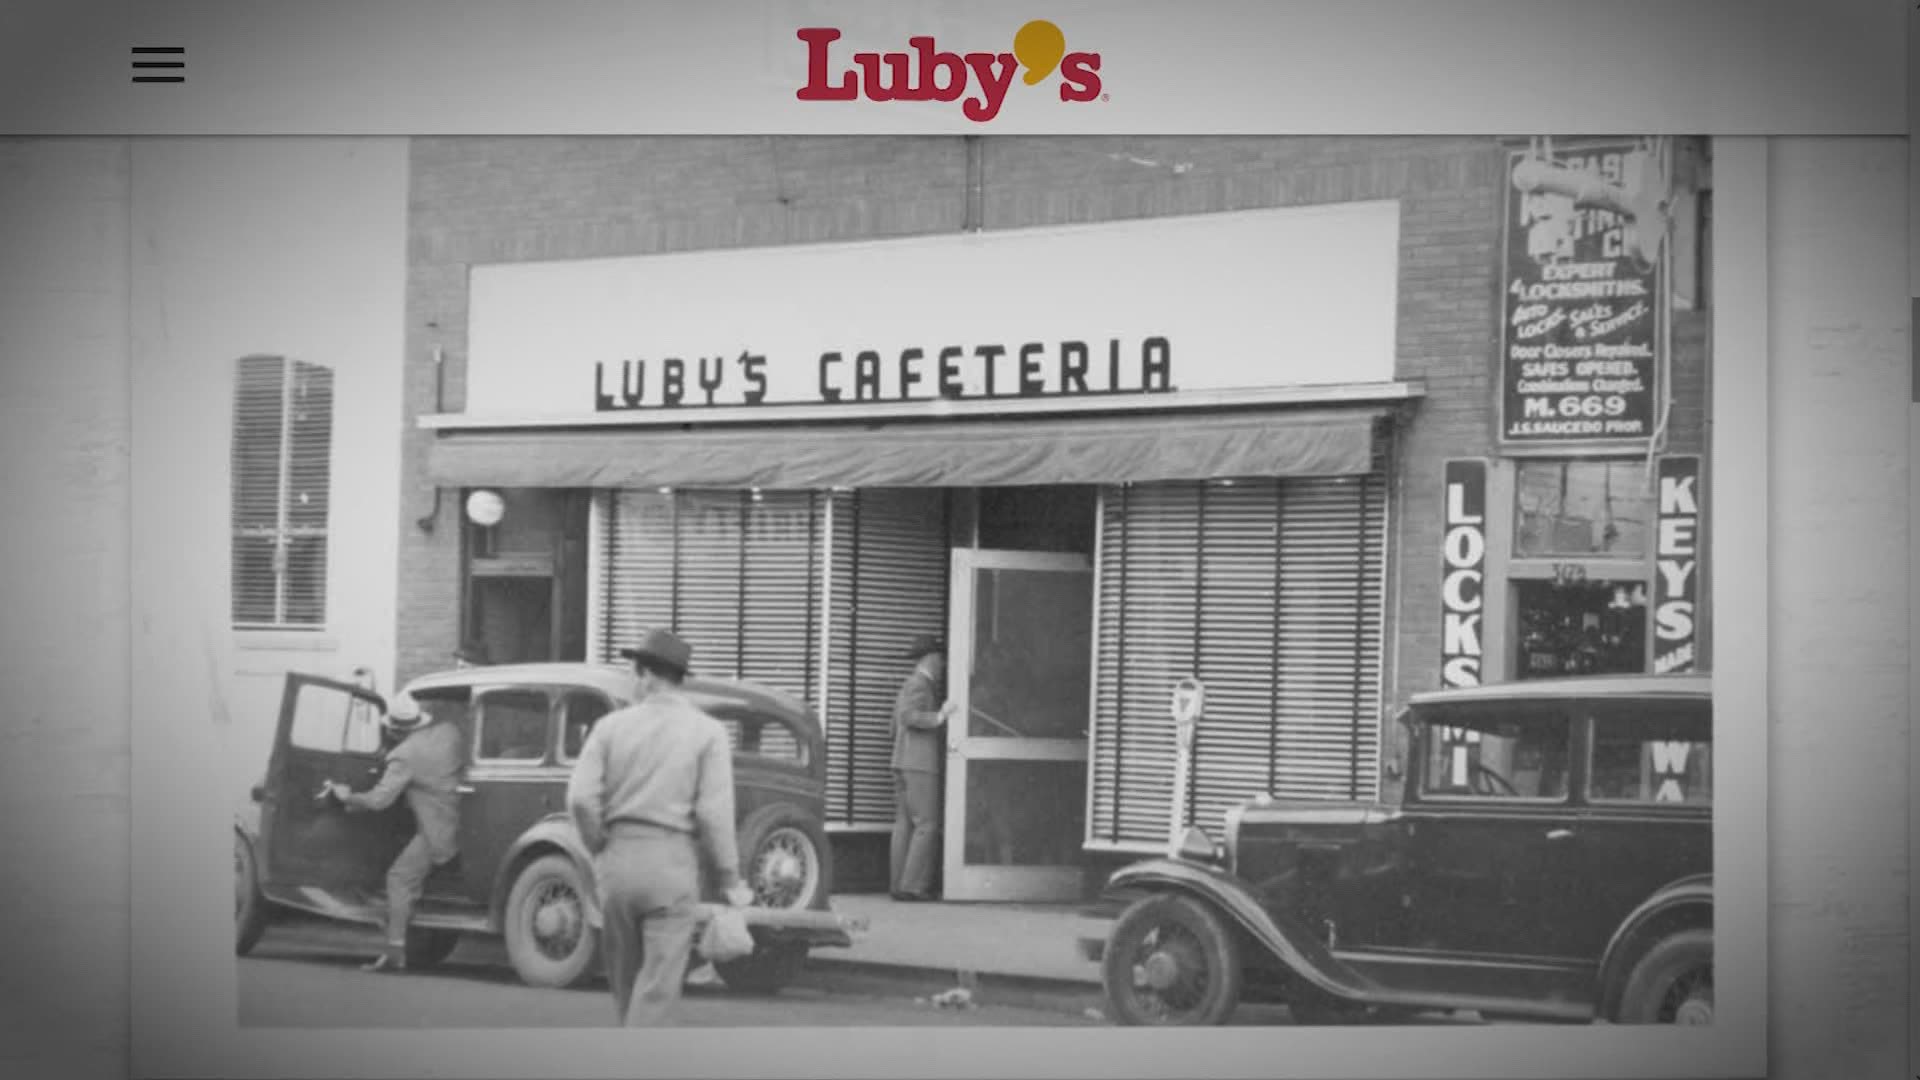 Growing up in Houston, Luby’s is tradition. Its iconic cafeterias, homestyle food and affordable prices leaves everyone craving something.